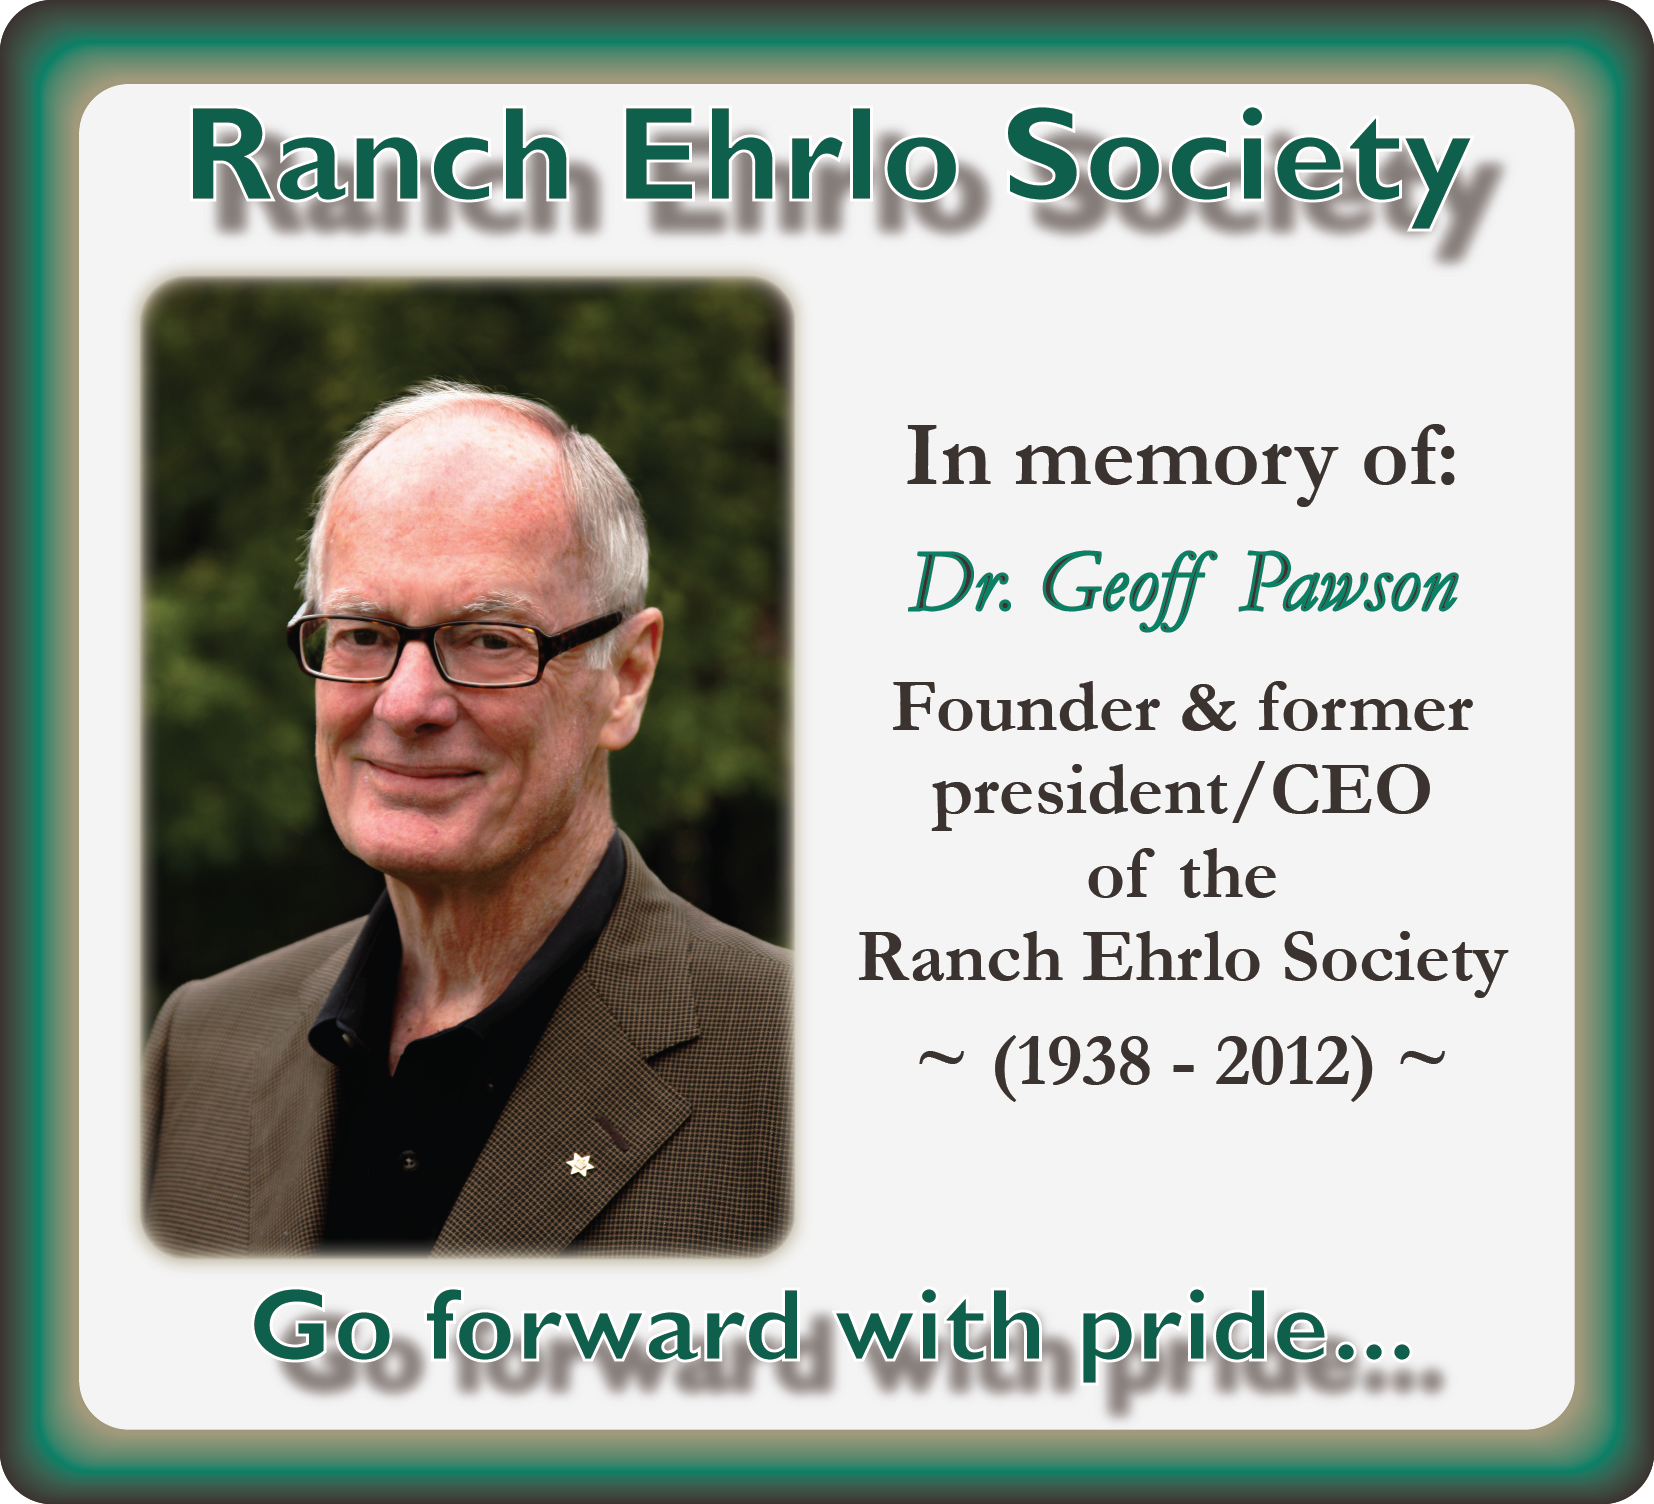 Dr. Geoff Pawson shares his philosophies that helped build the Ranch Ehrlo Society